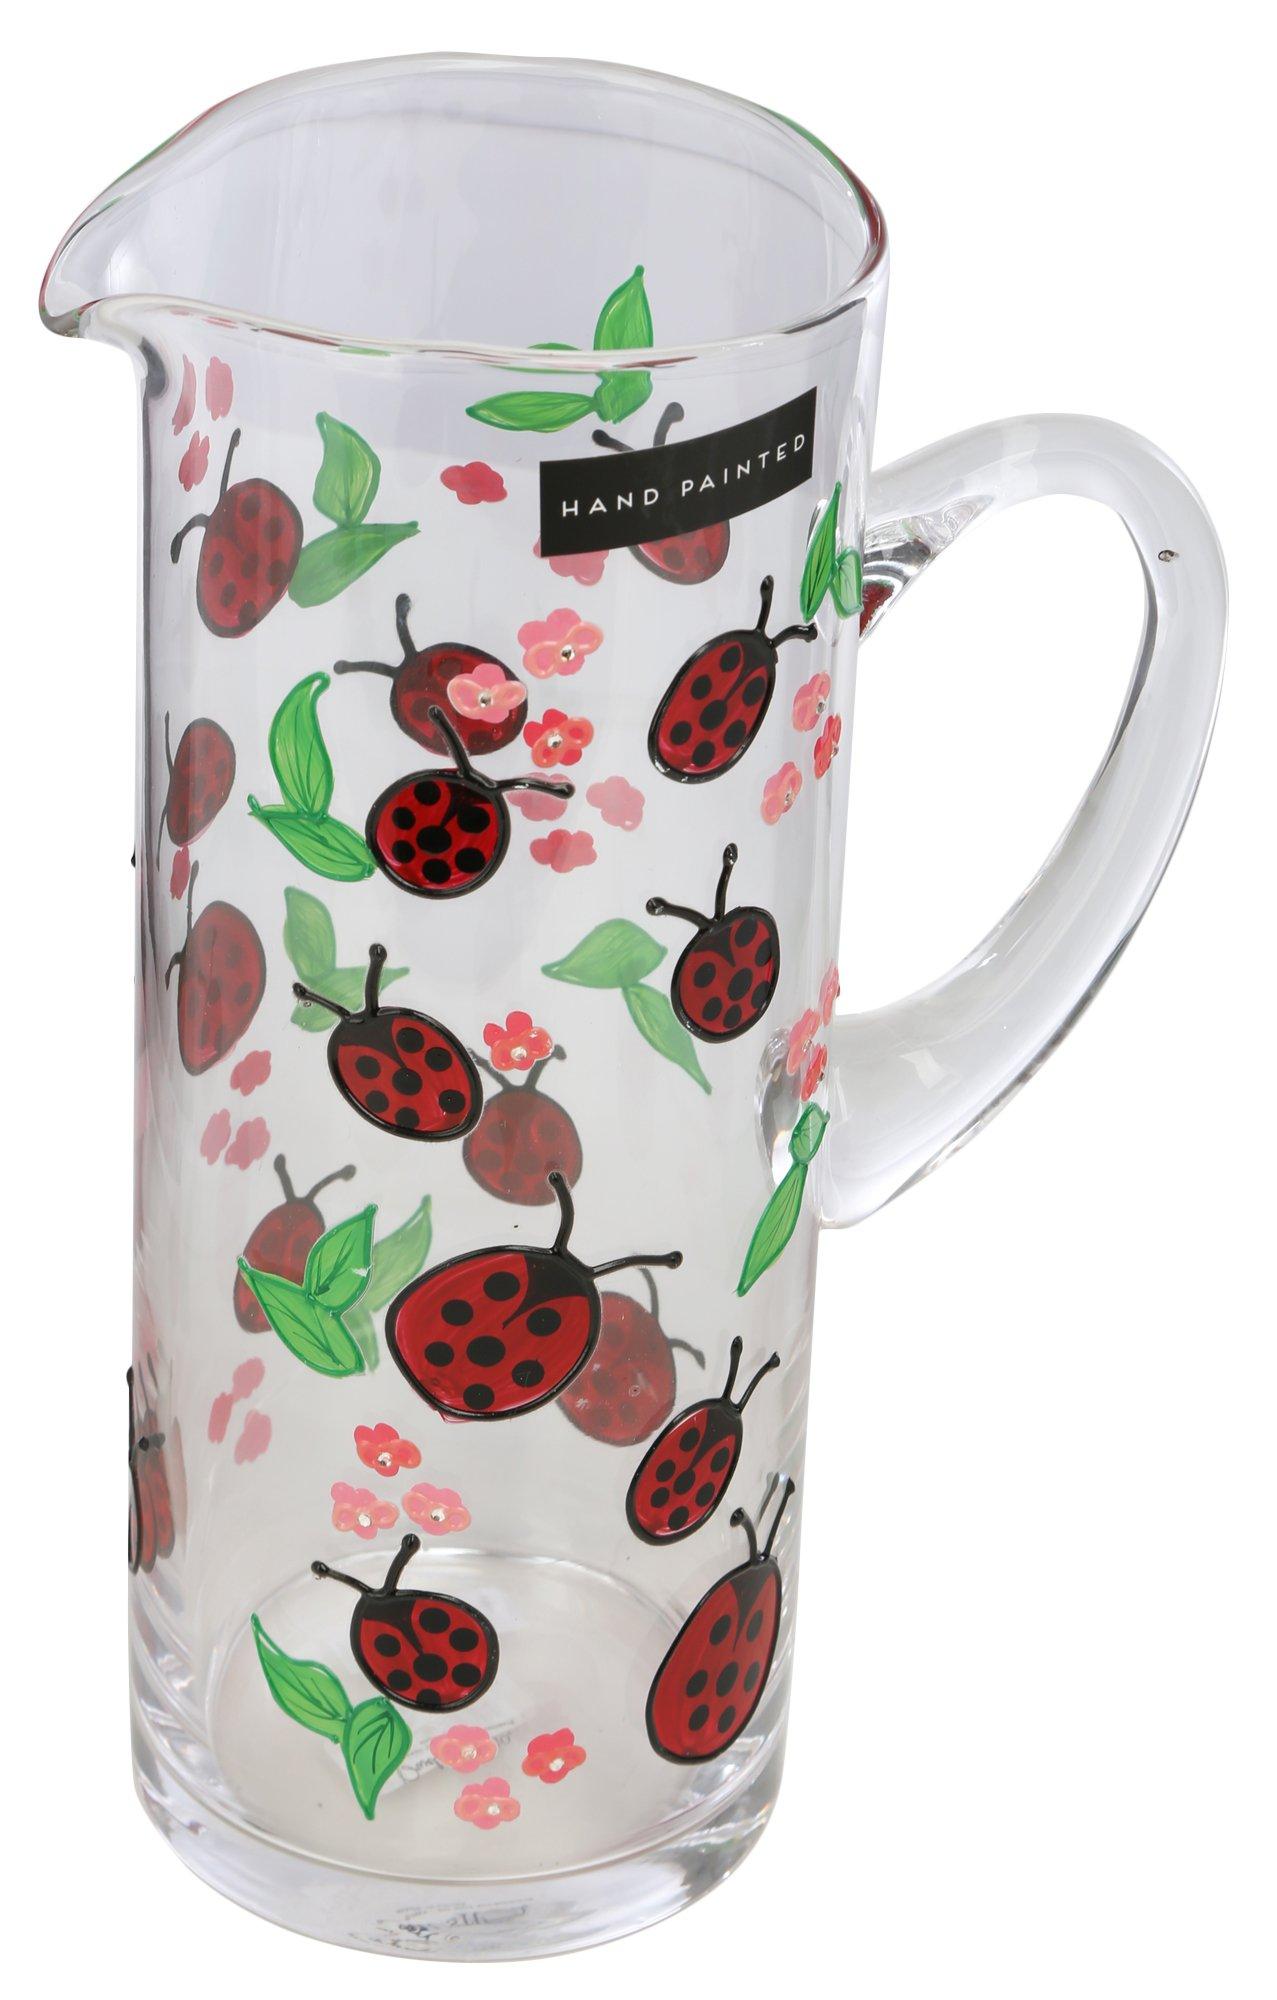 11 in Handpainted Glass Ladybug Drink Pitcher